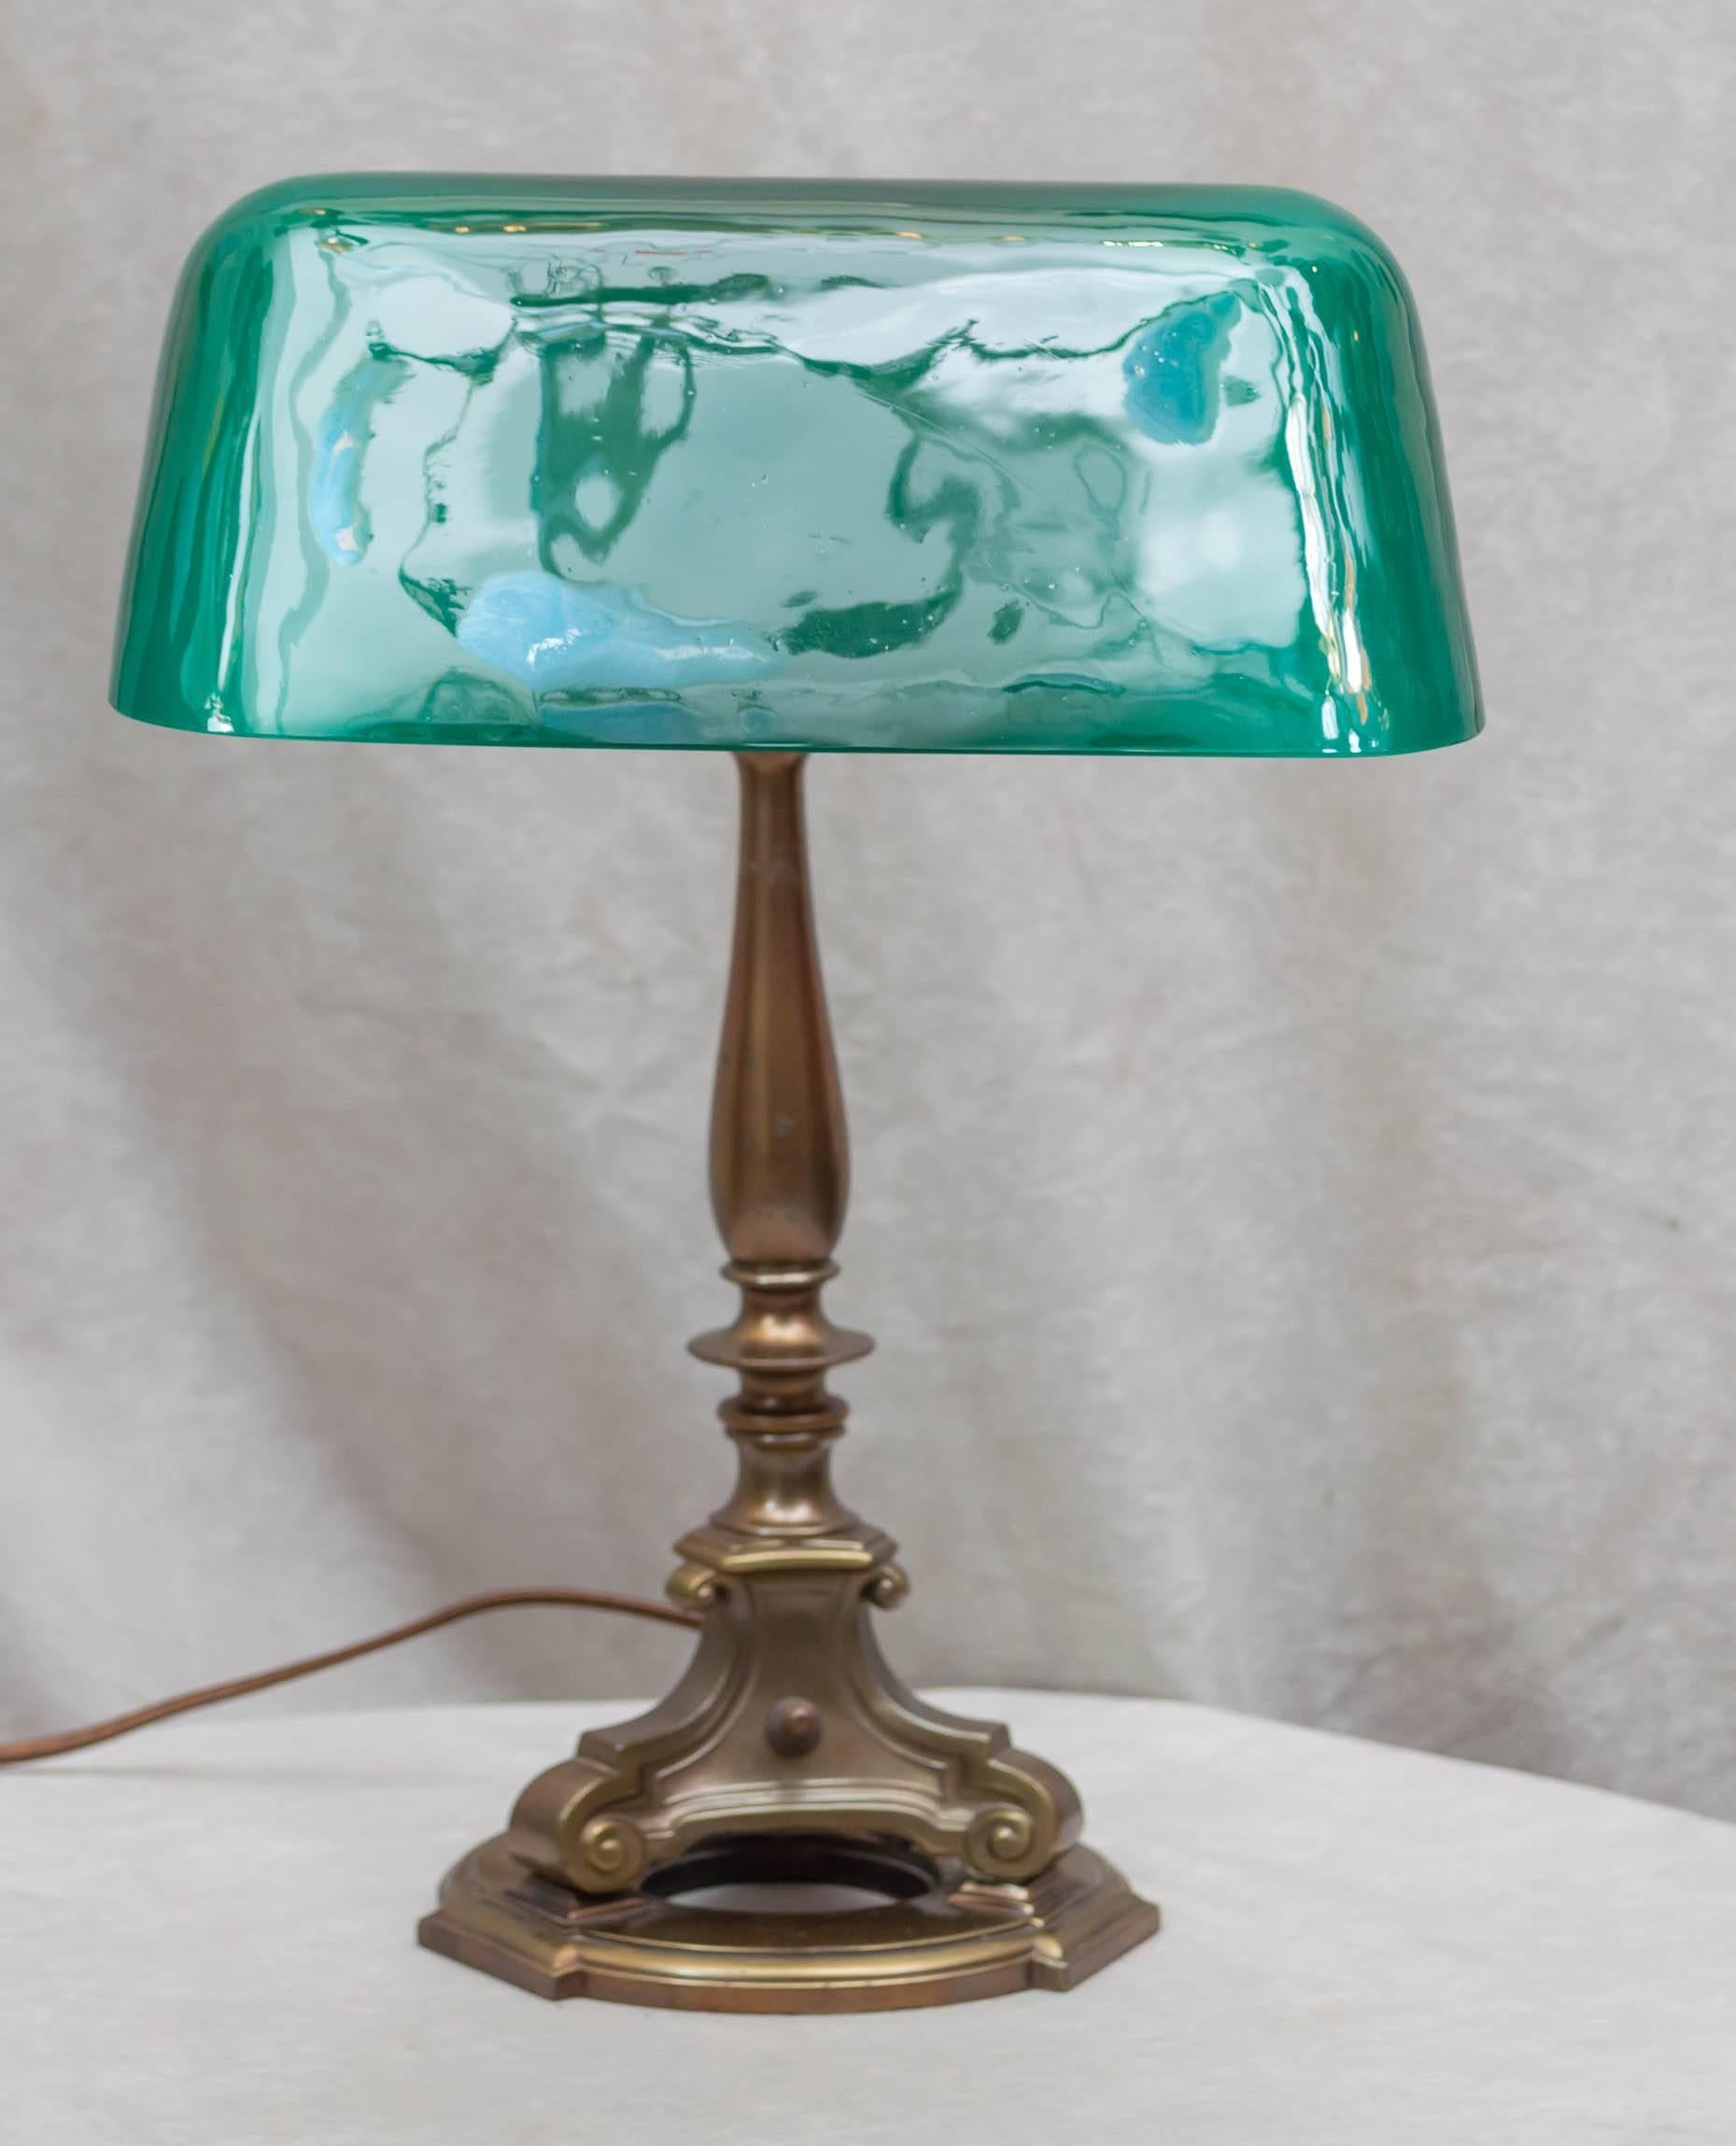 This signed Emeralite desk lamp is several cuts above the standard model. First off the shade is ten inches wide; the overwhelming examples are eight inch width. This has the glass diffuser under the shade to soften the light, and to top it off the